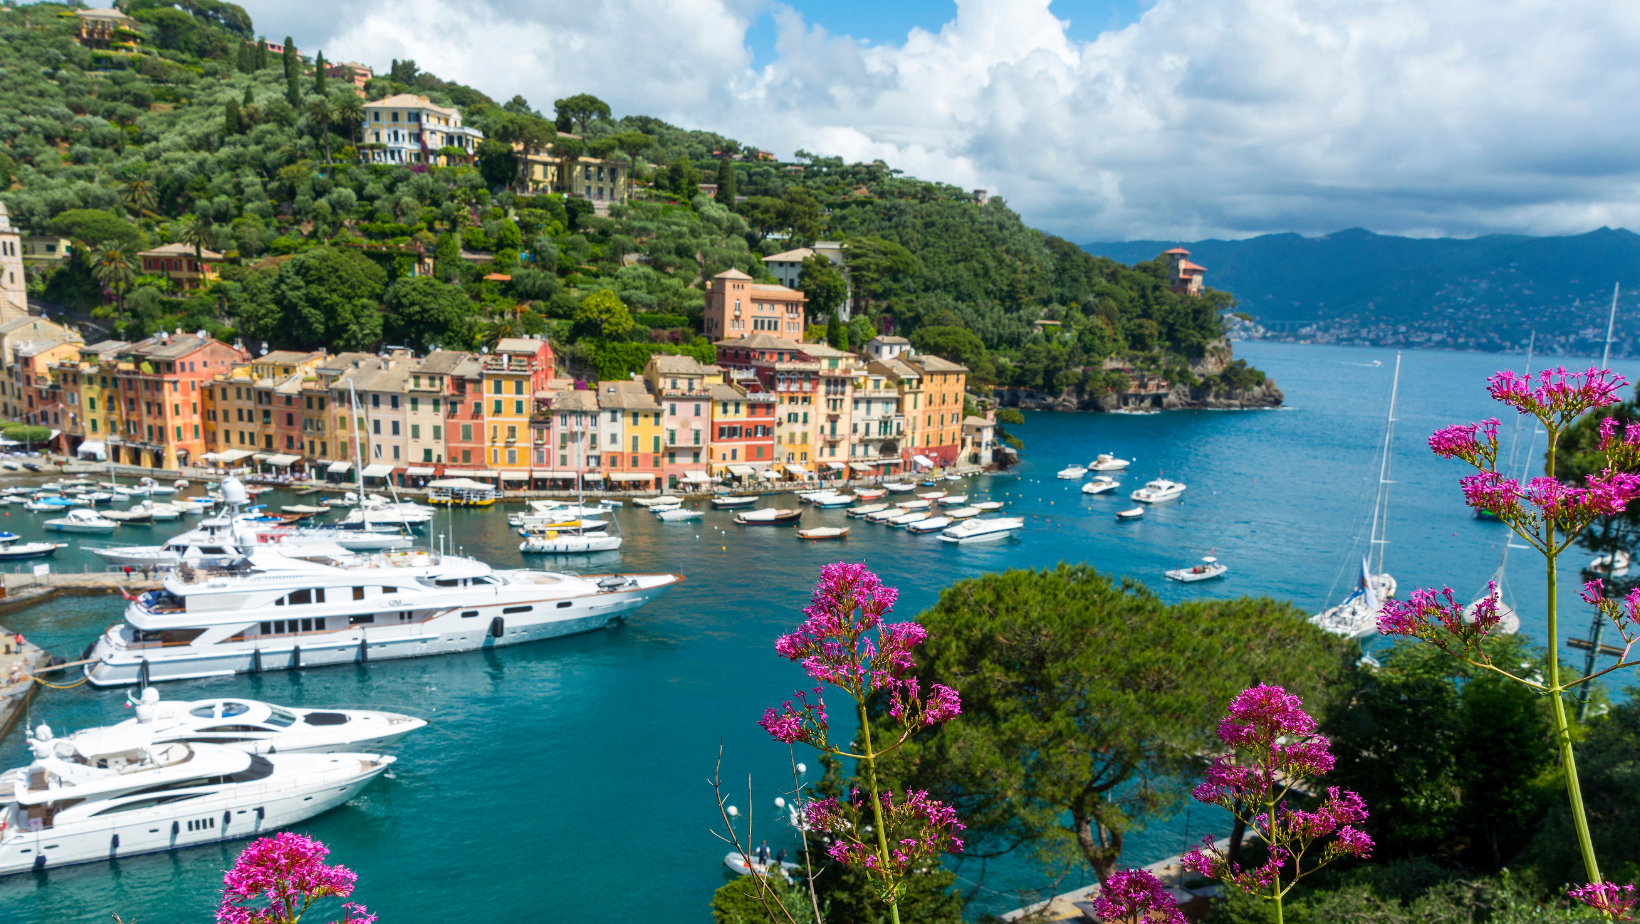 April 12th Culinary Journey to the Italian Riviera